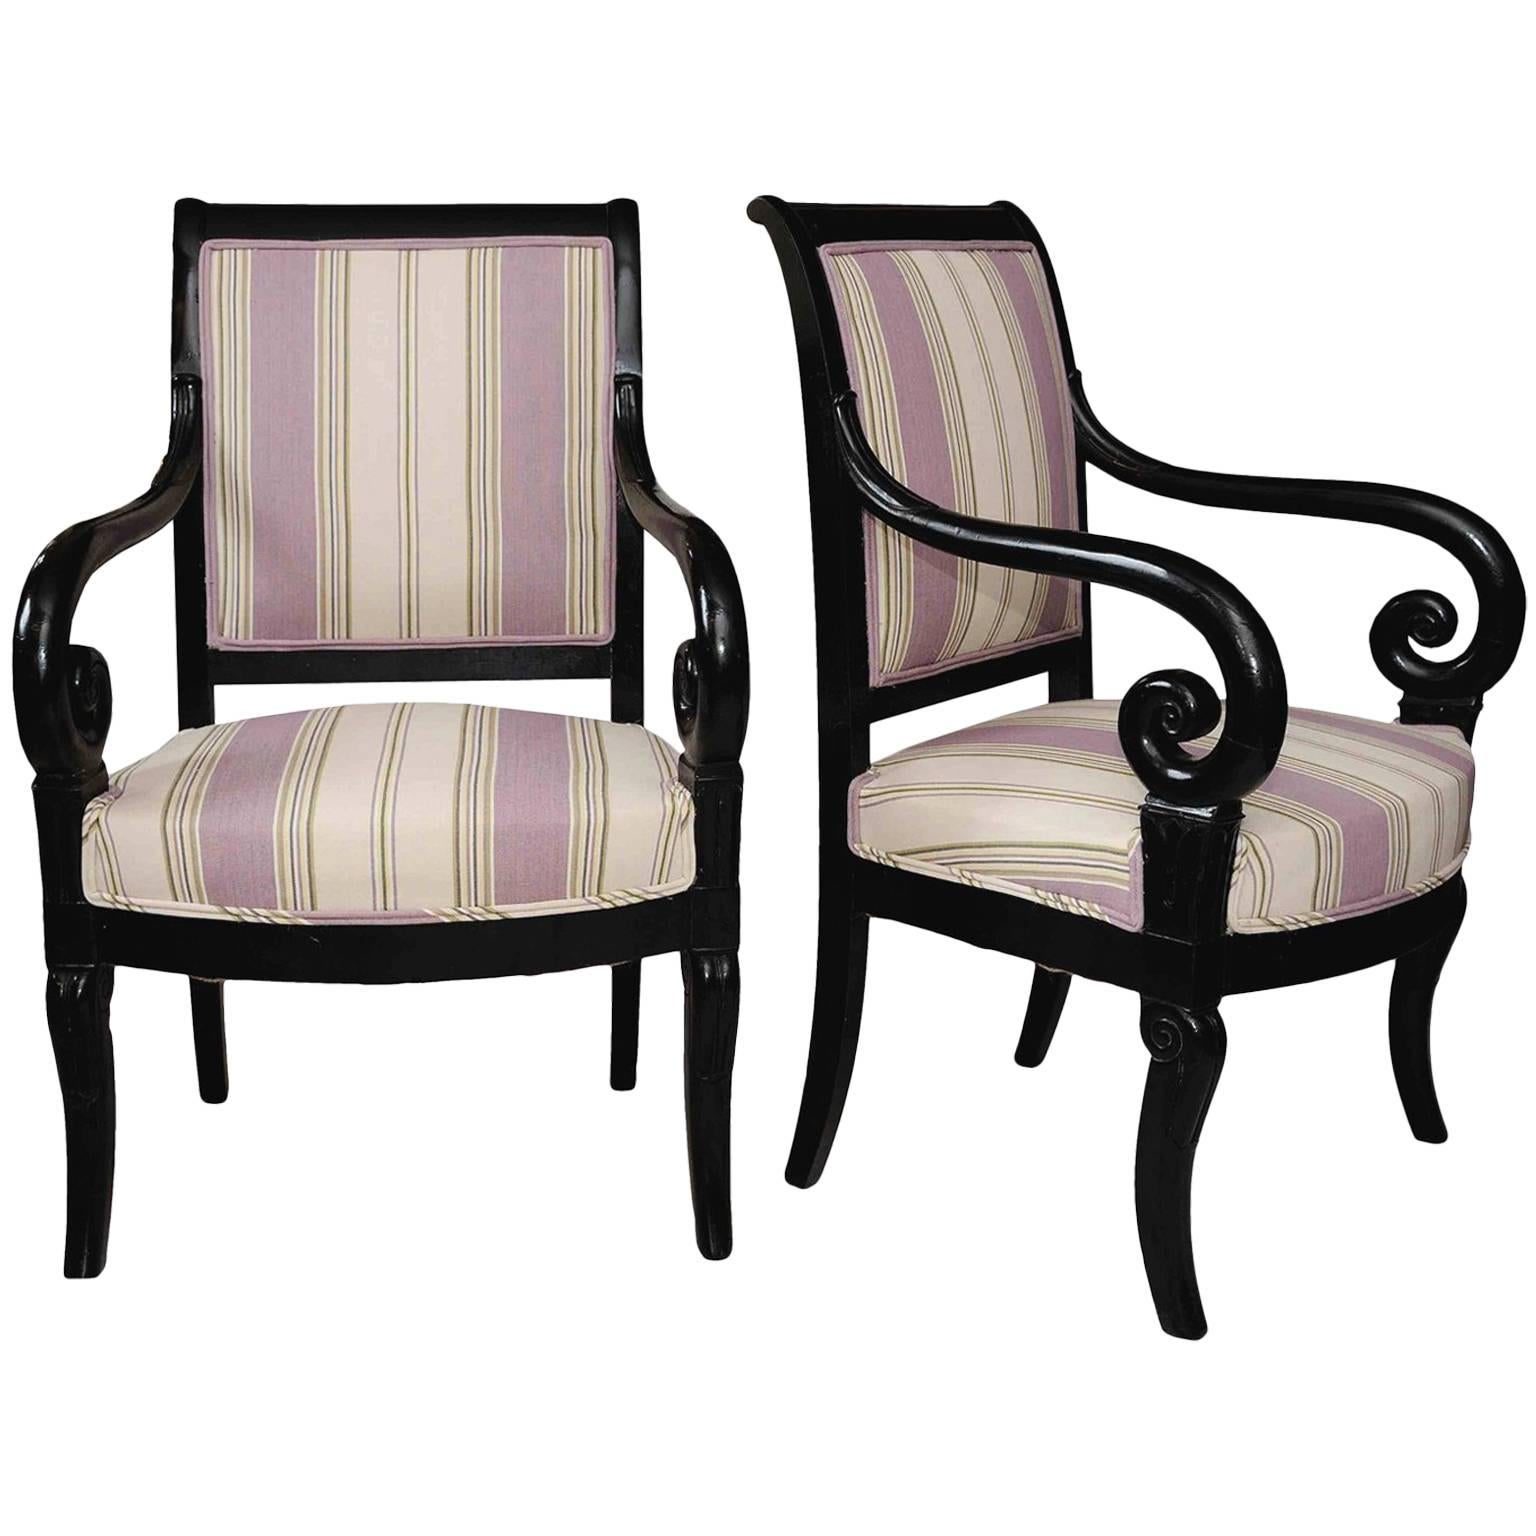 Pair of French 19th Century Empire Period Ebonized Open Armchairs, circa 1820 For Sale